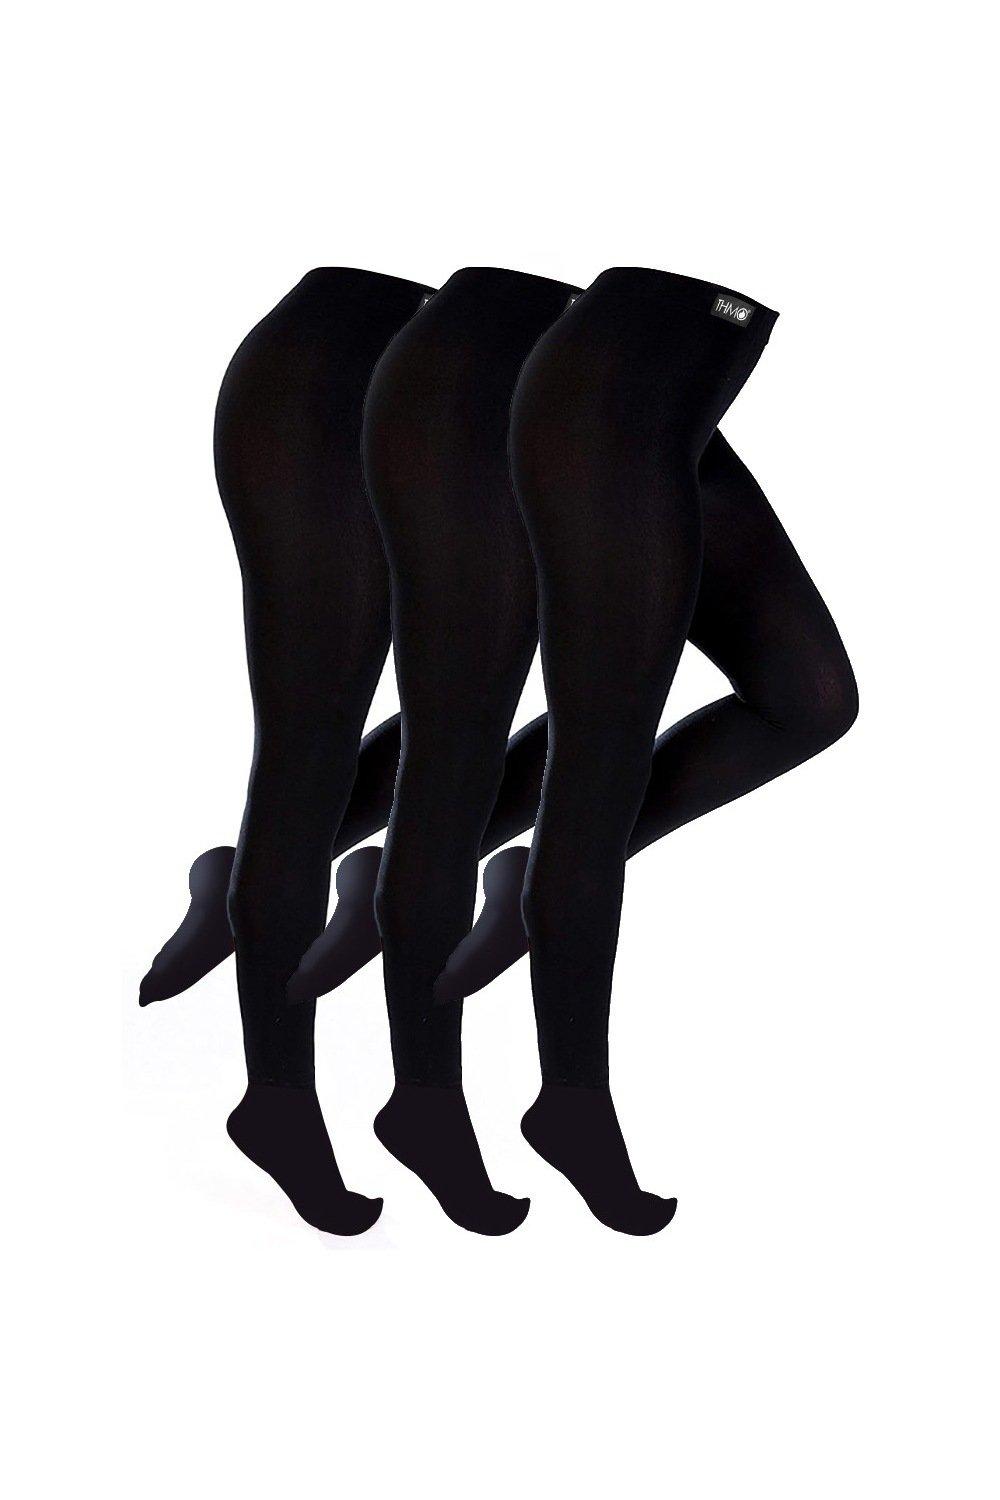 3 Pair Warm Thermal Winter Soft Fleece Lined Black Tights